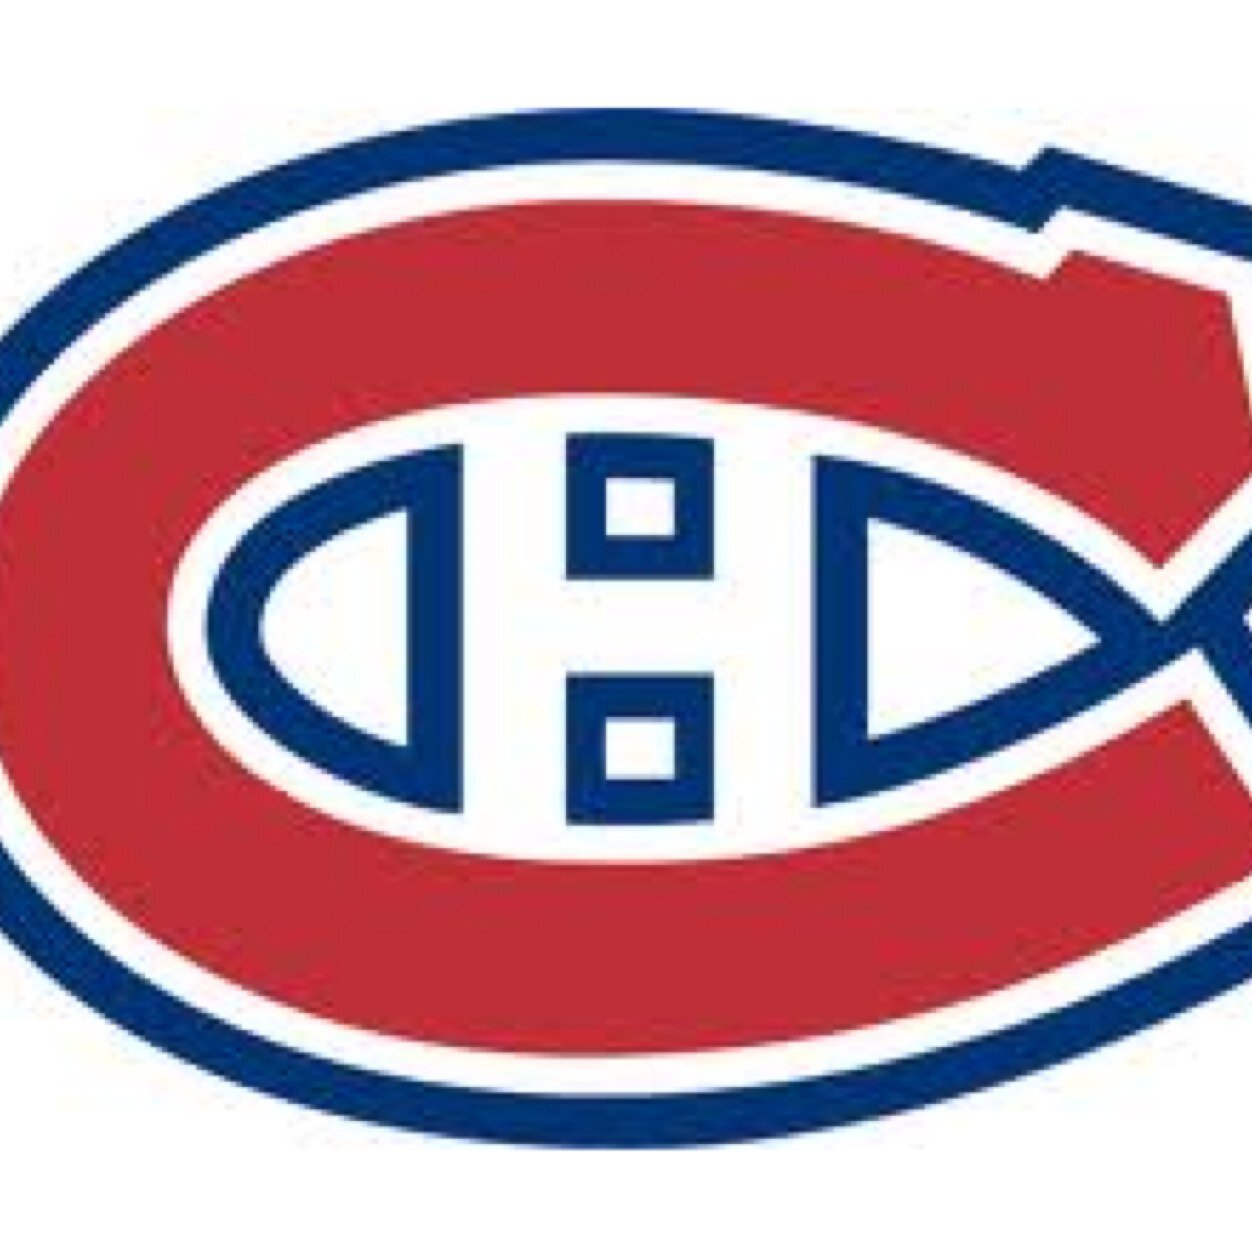 This isn't the official habs account